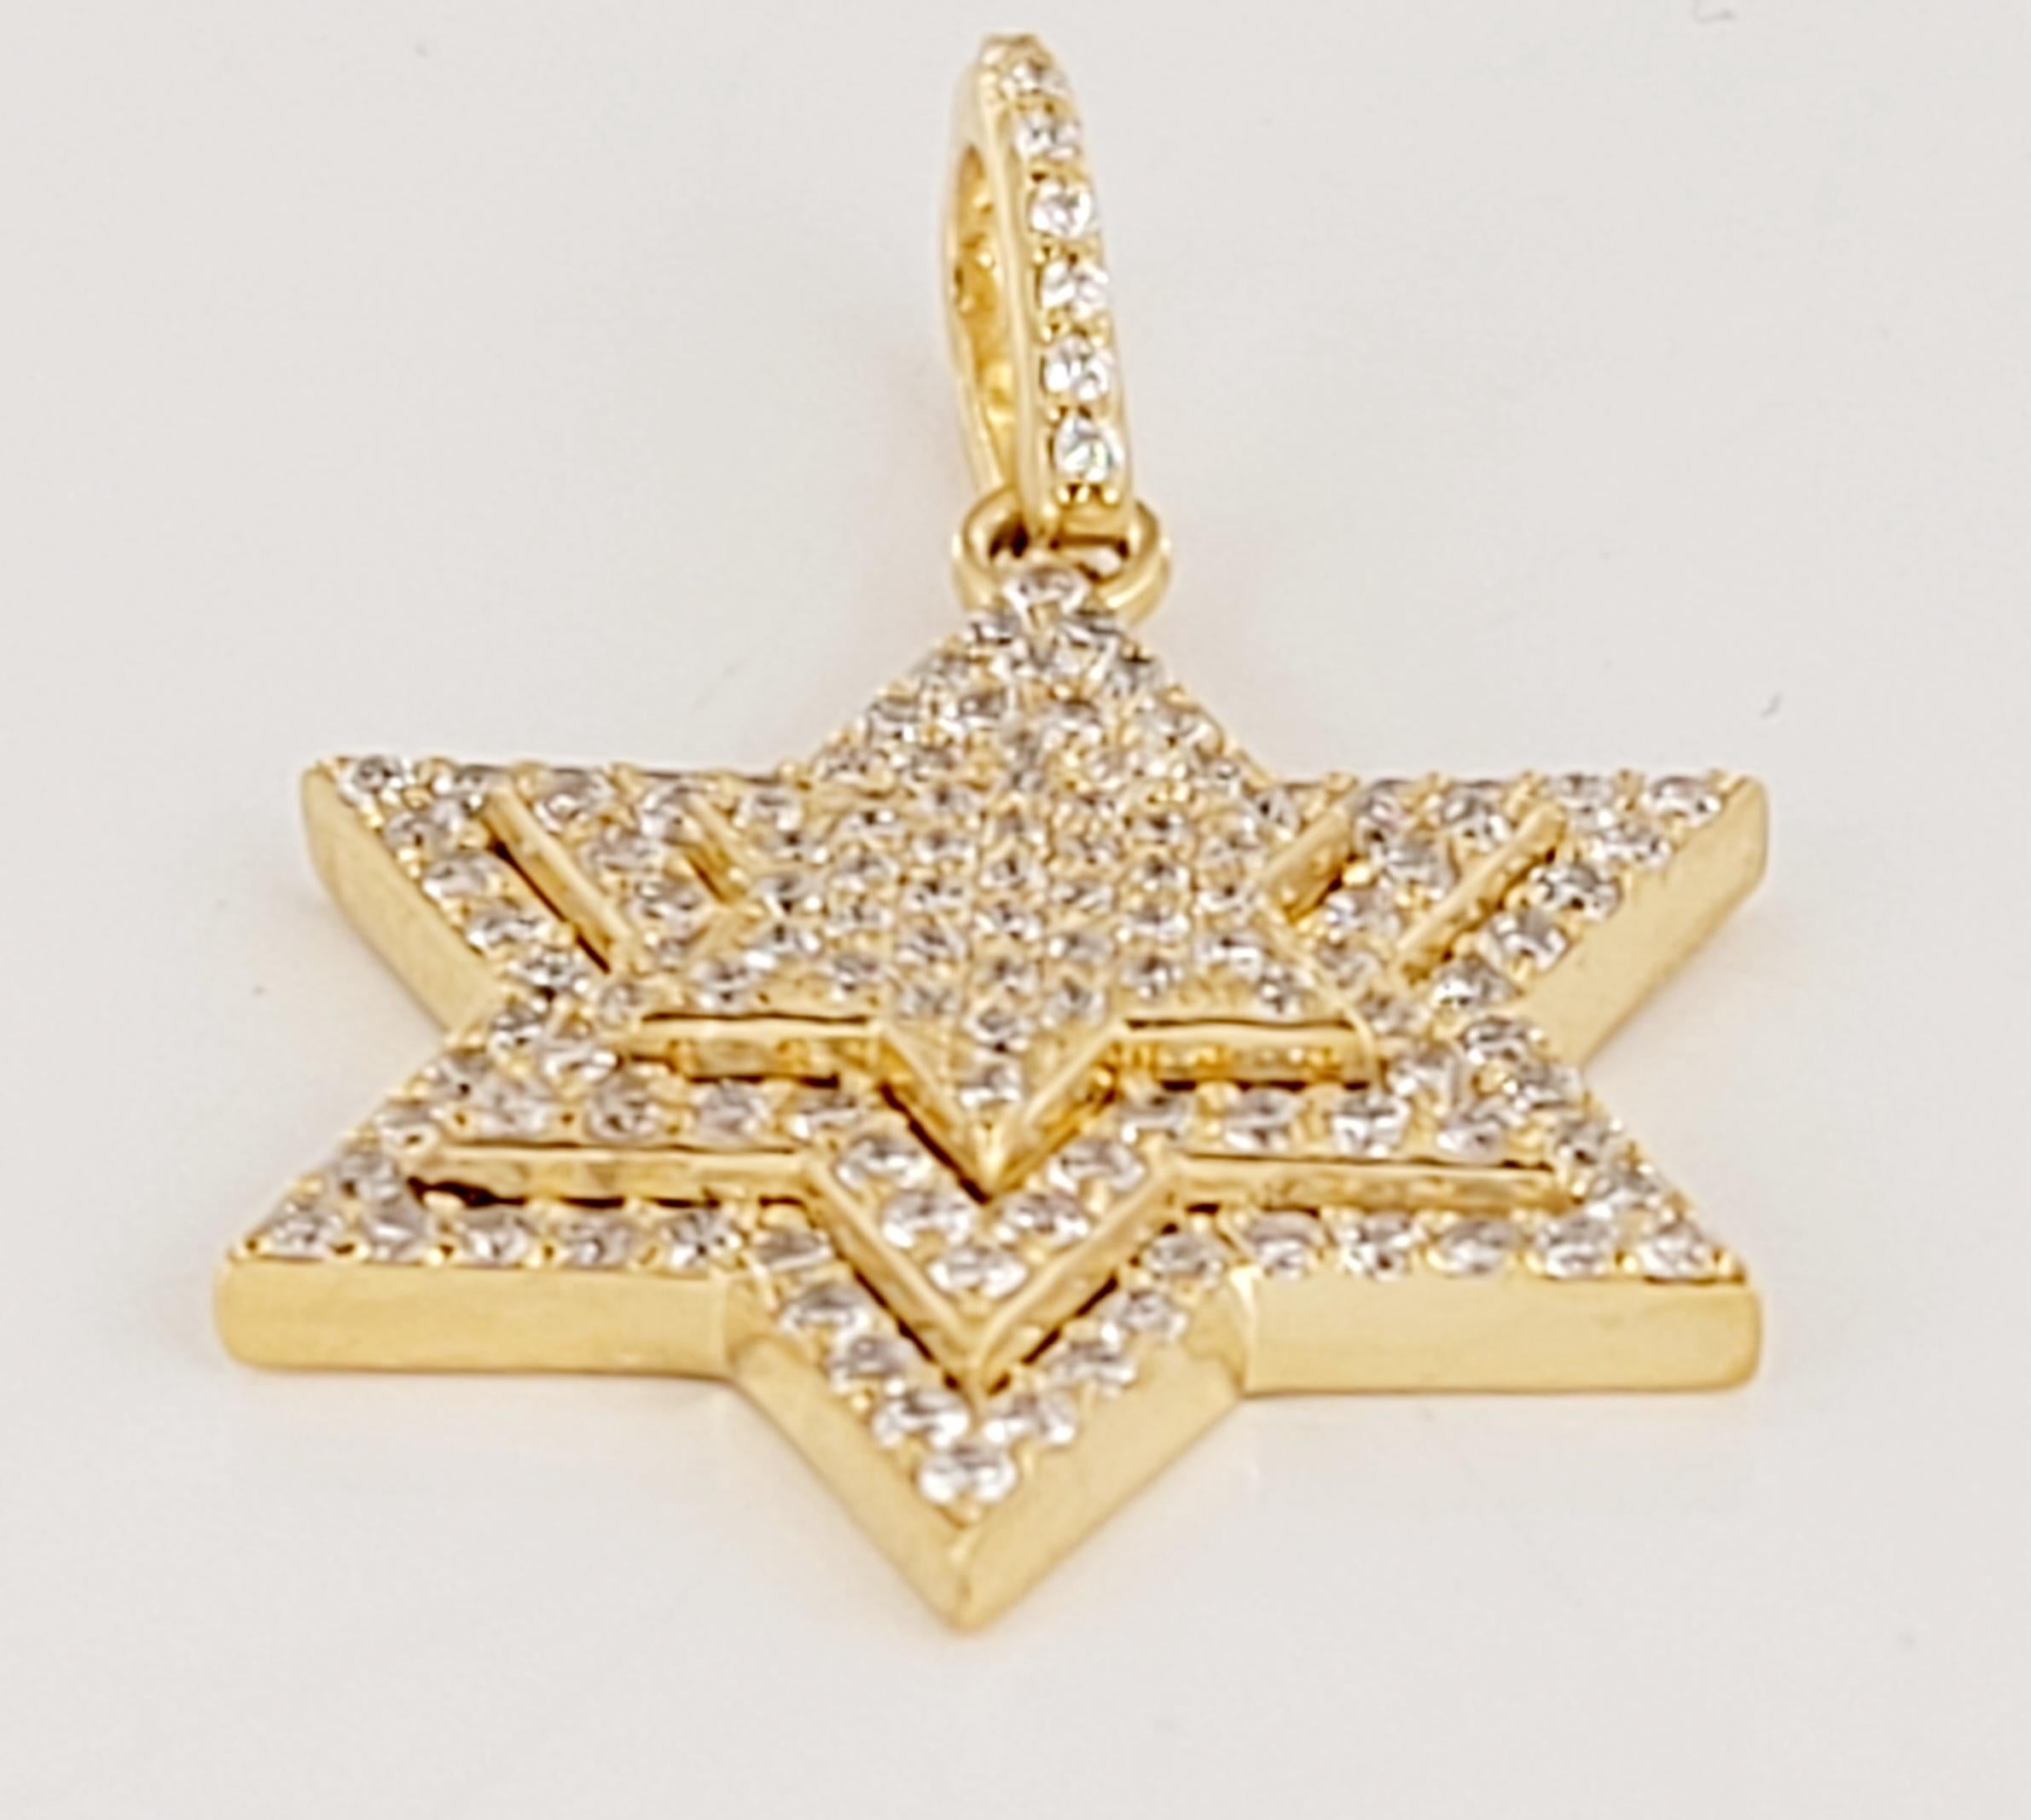 Star Shape pendant with Diamonds
Material: 14K Yellow Gold  
Diamond: .25ct
Diamond Clarity: VS
Color Grade: G
Dimension: 19.7mm
With Bail 27.5mm
Pendant Weight: 2.5gr
Condition New, never worn
Retail Price:$1600